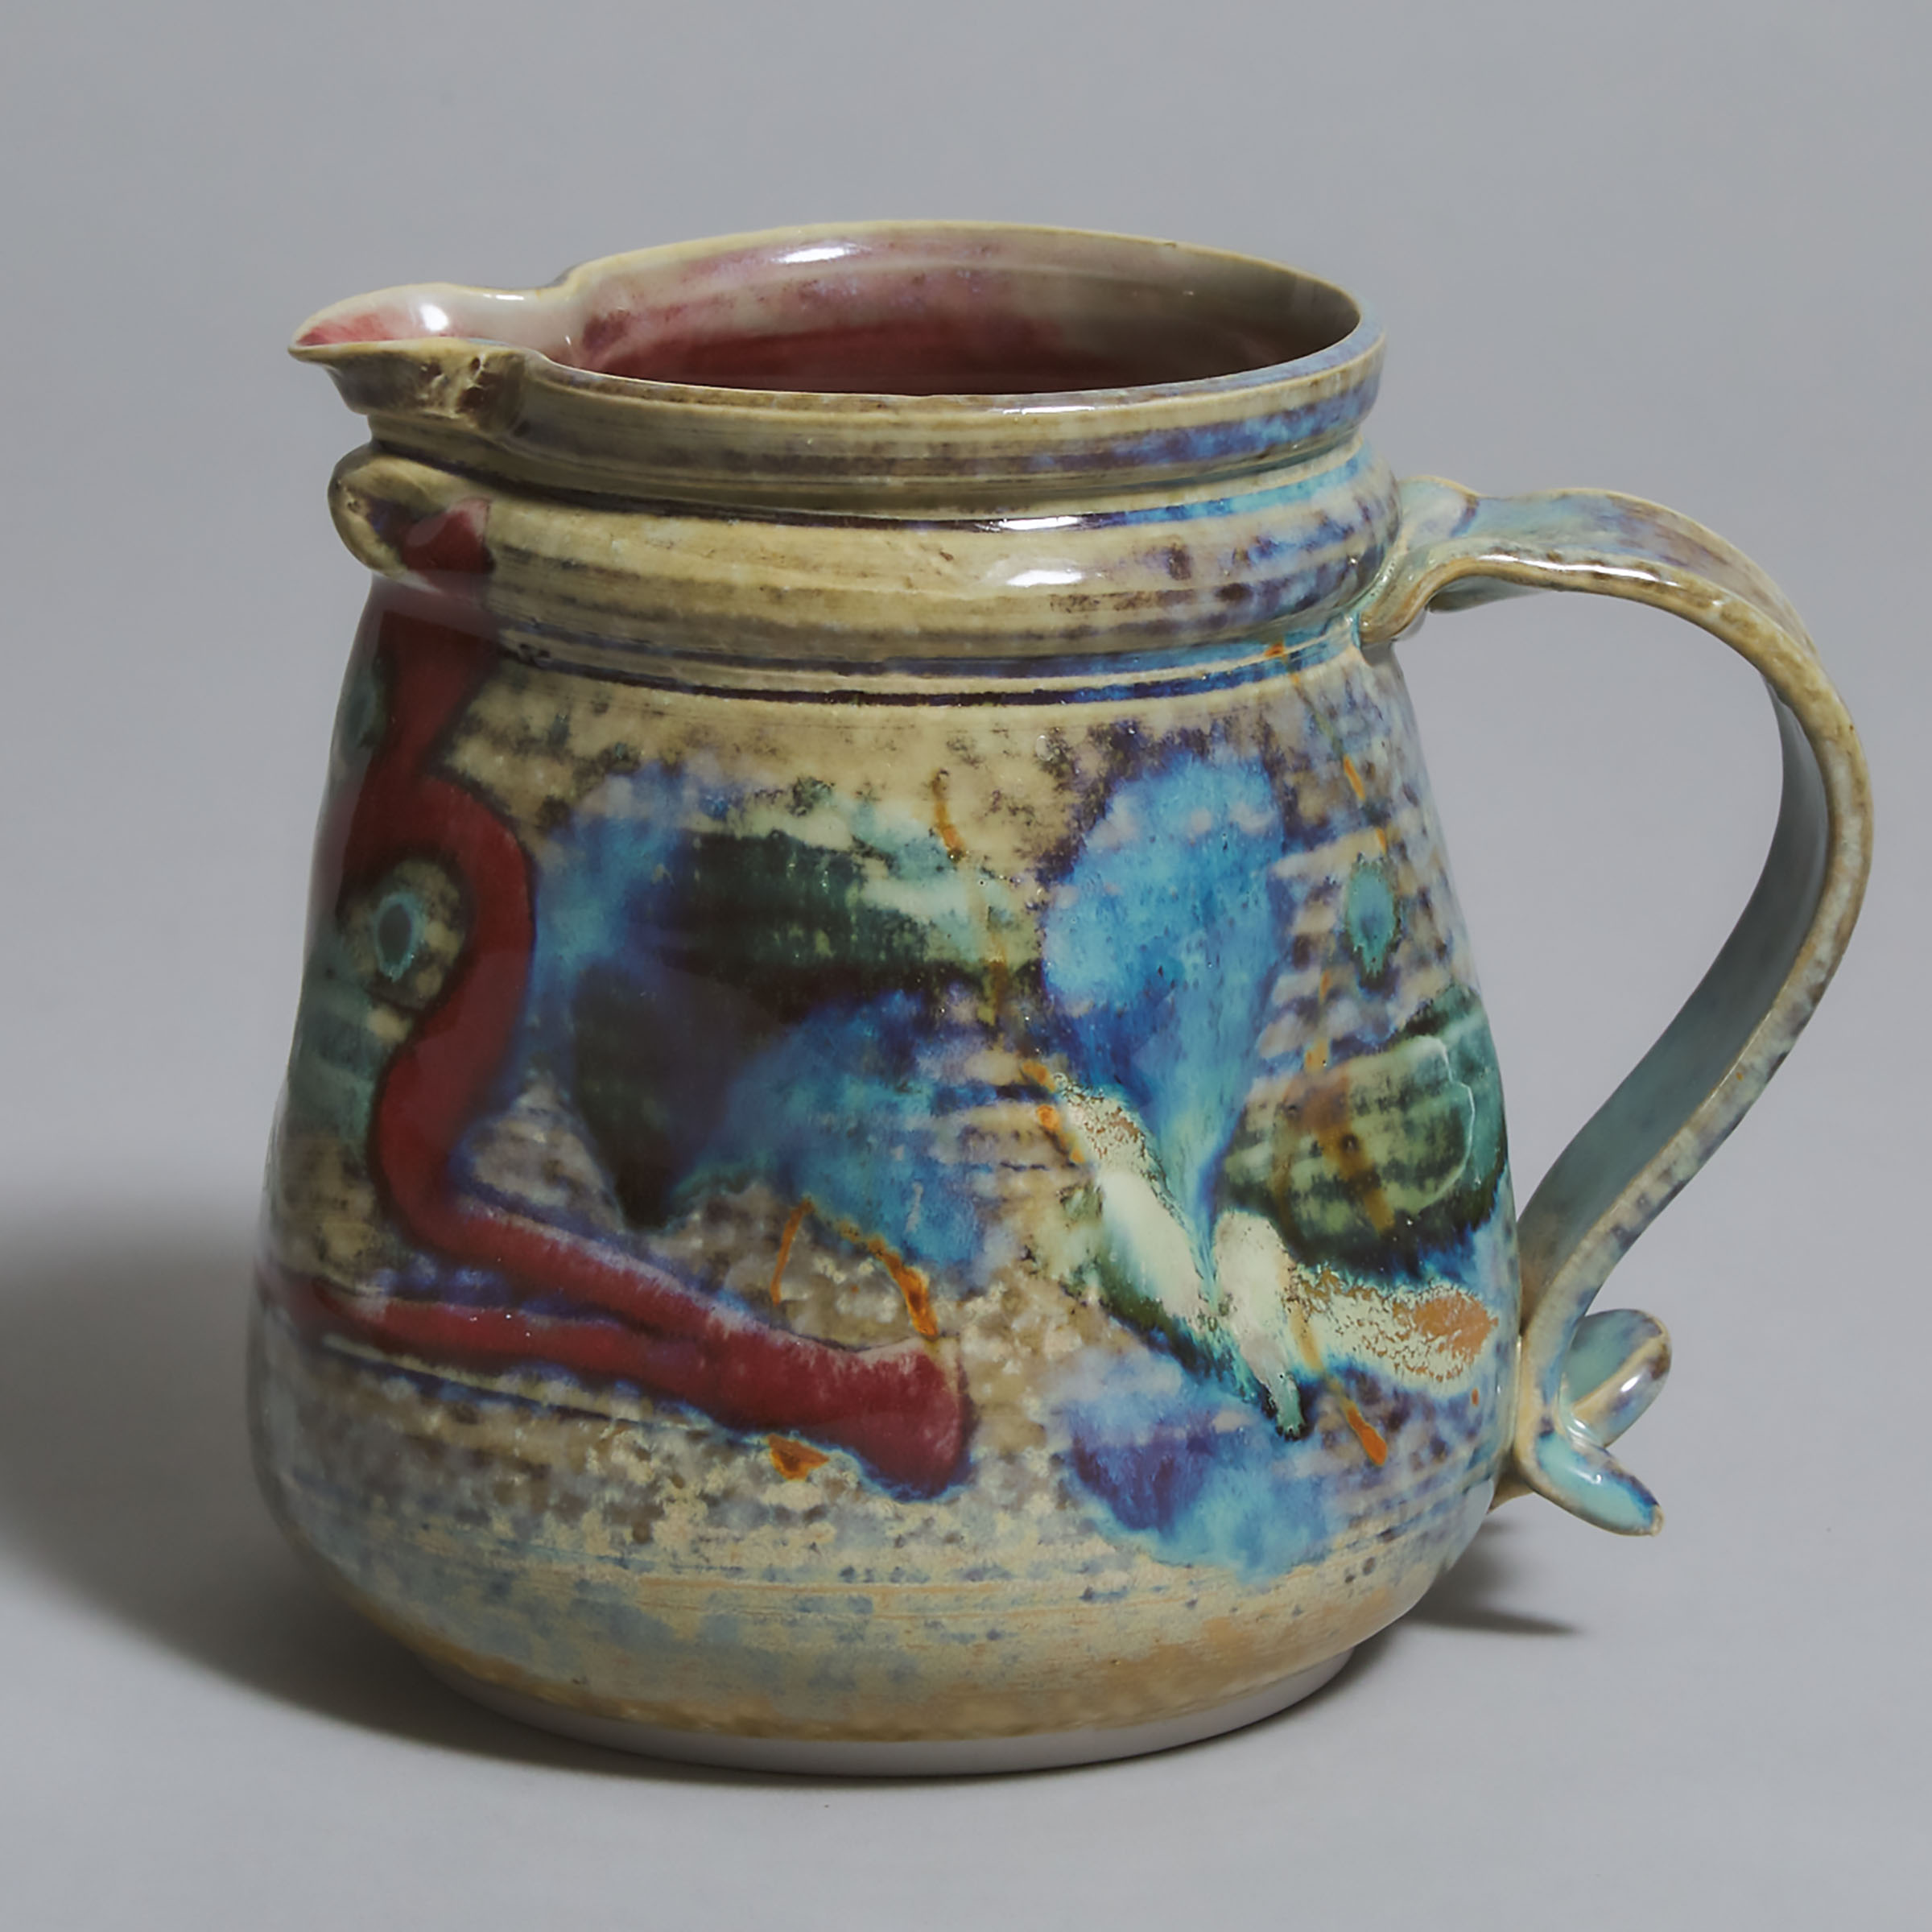 Kayo O'Young (Canadian, b.1950), Blue, Red, and Grey Glazed Jug, 1988